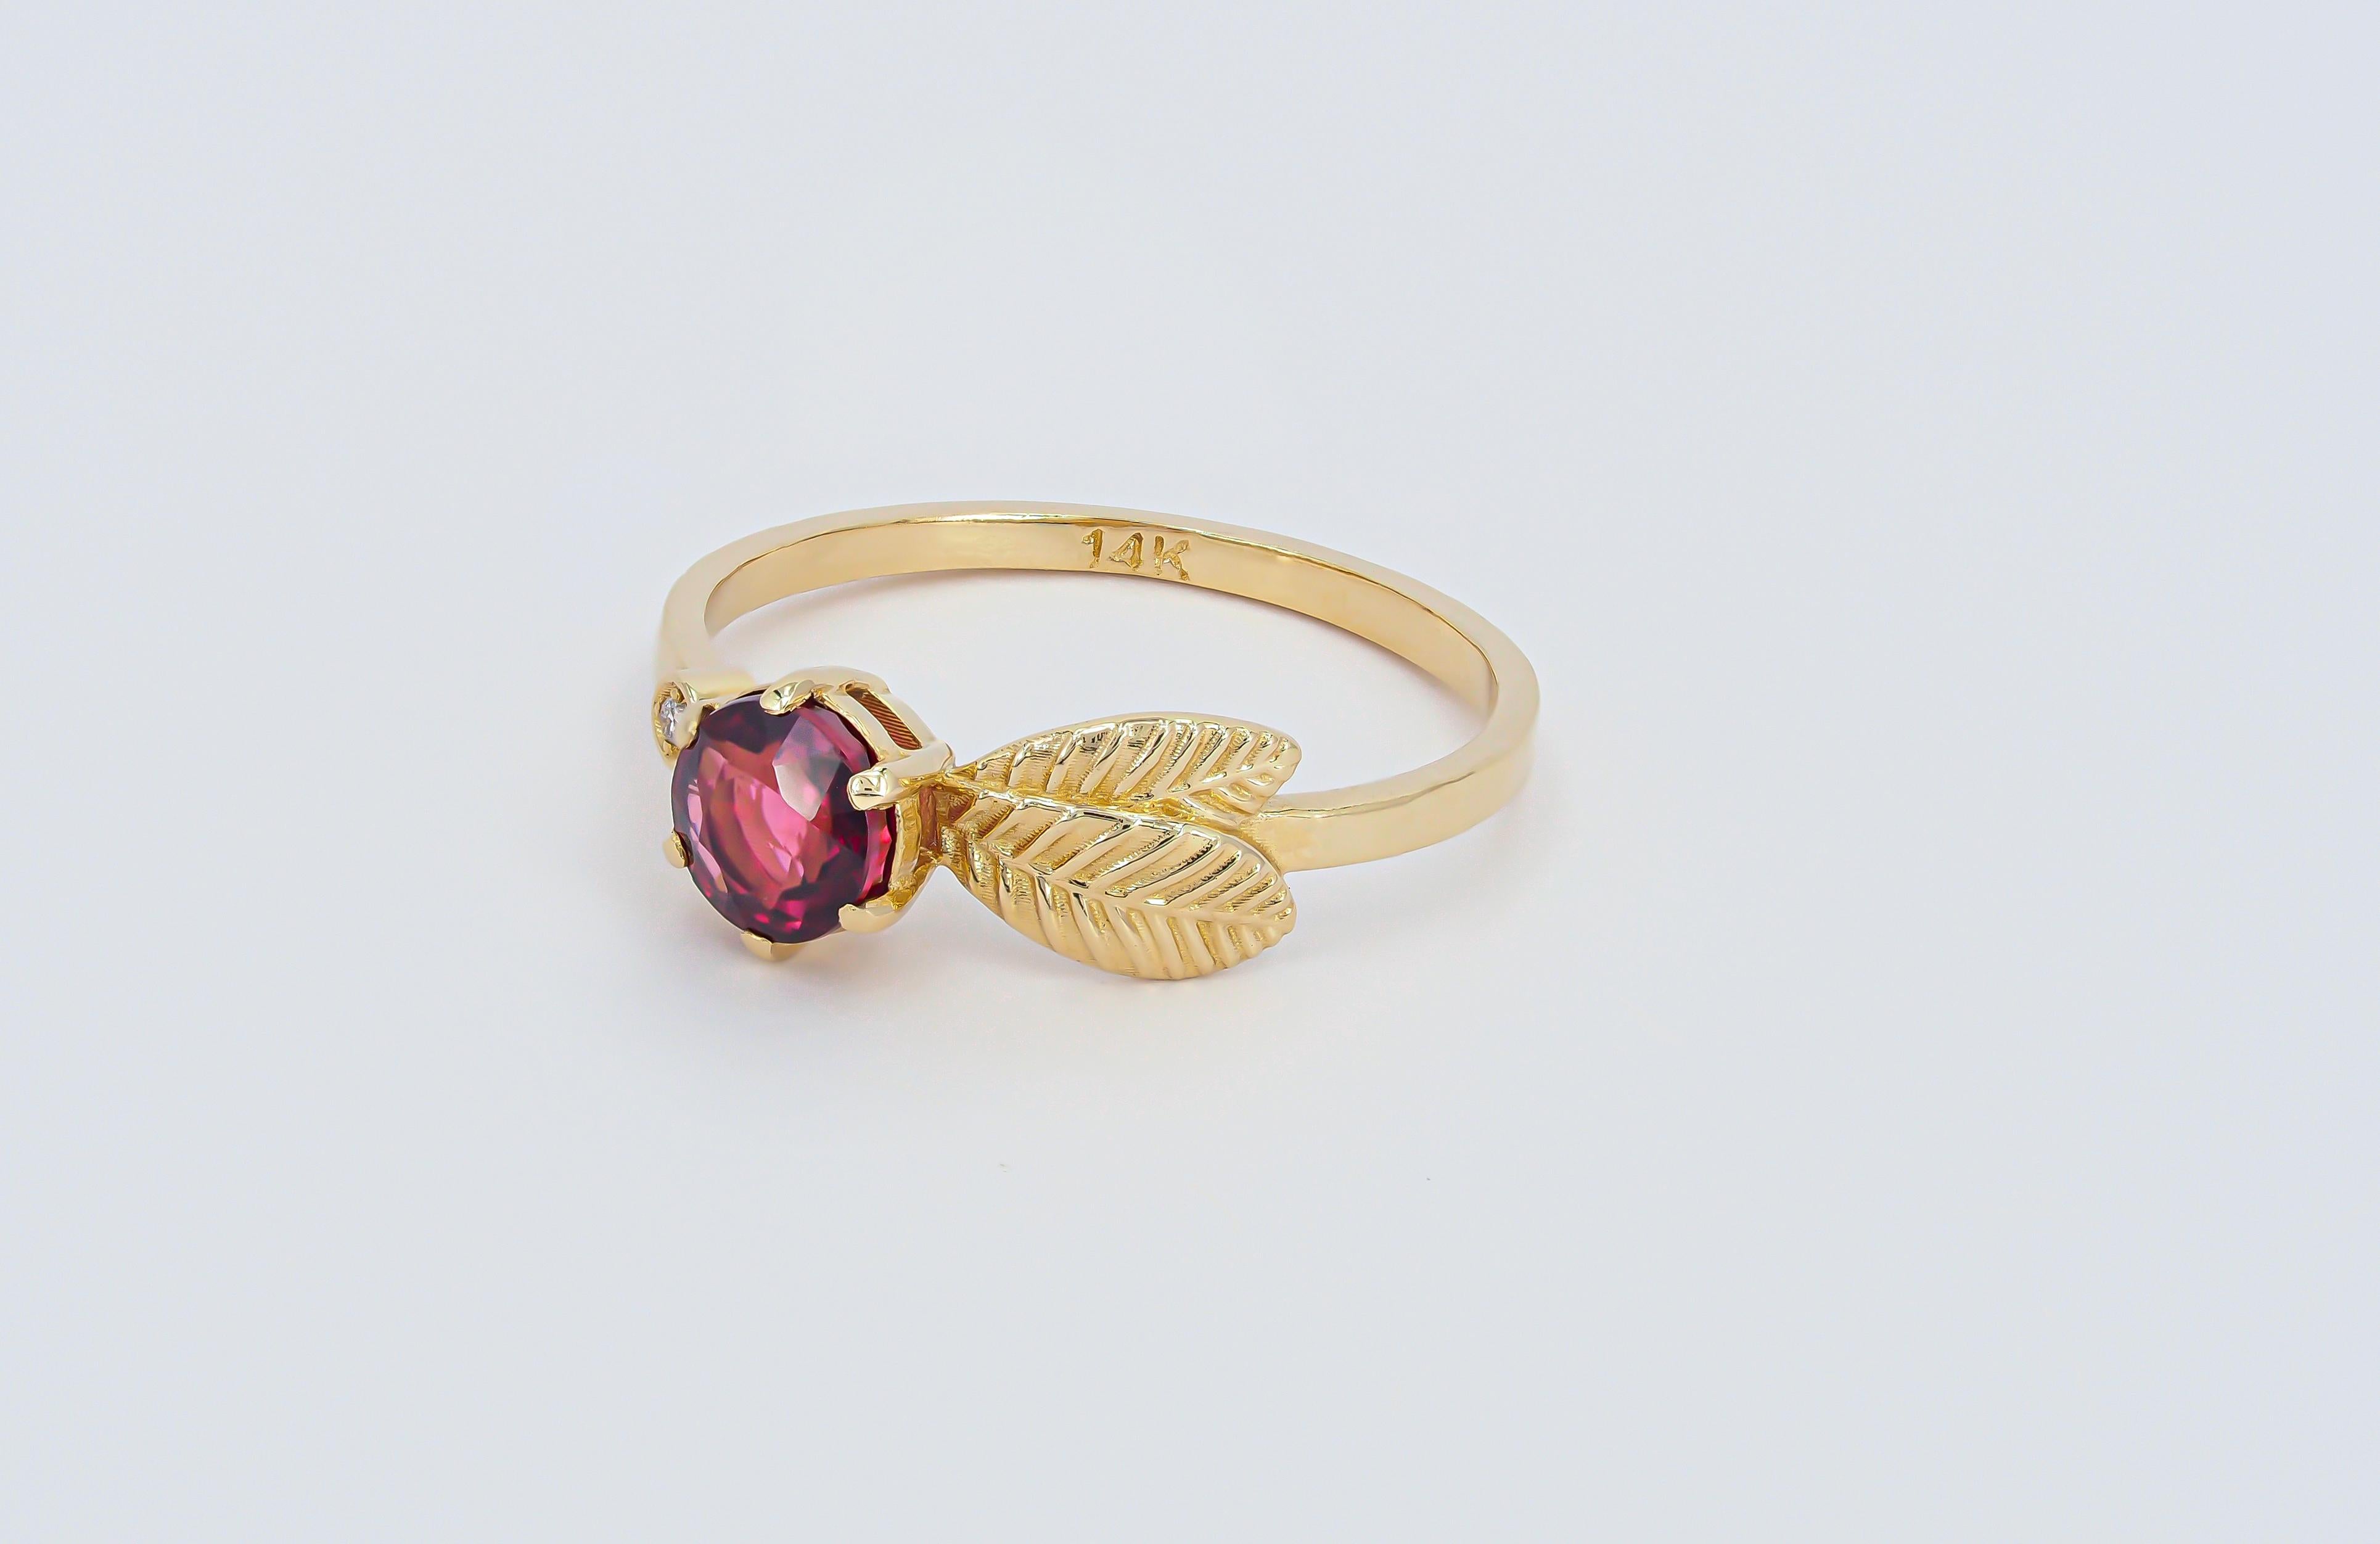 For Sale:  14k Gold Ring with Garnet and Diamonds 4